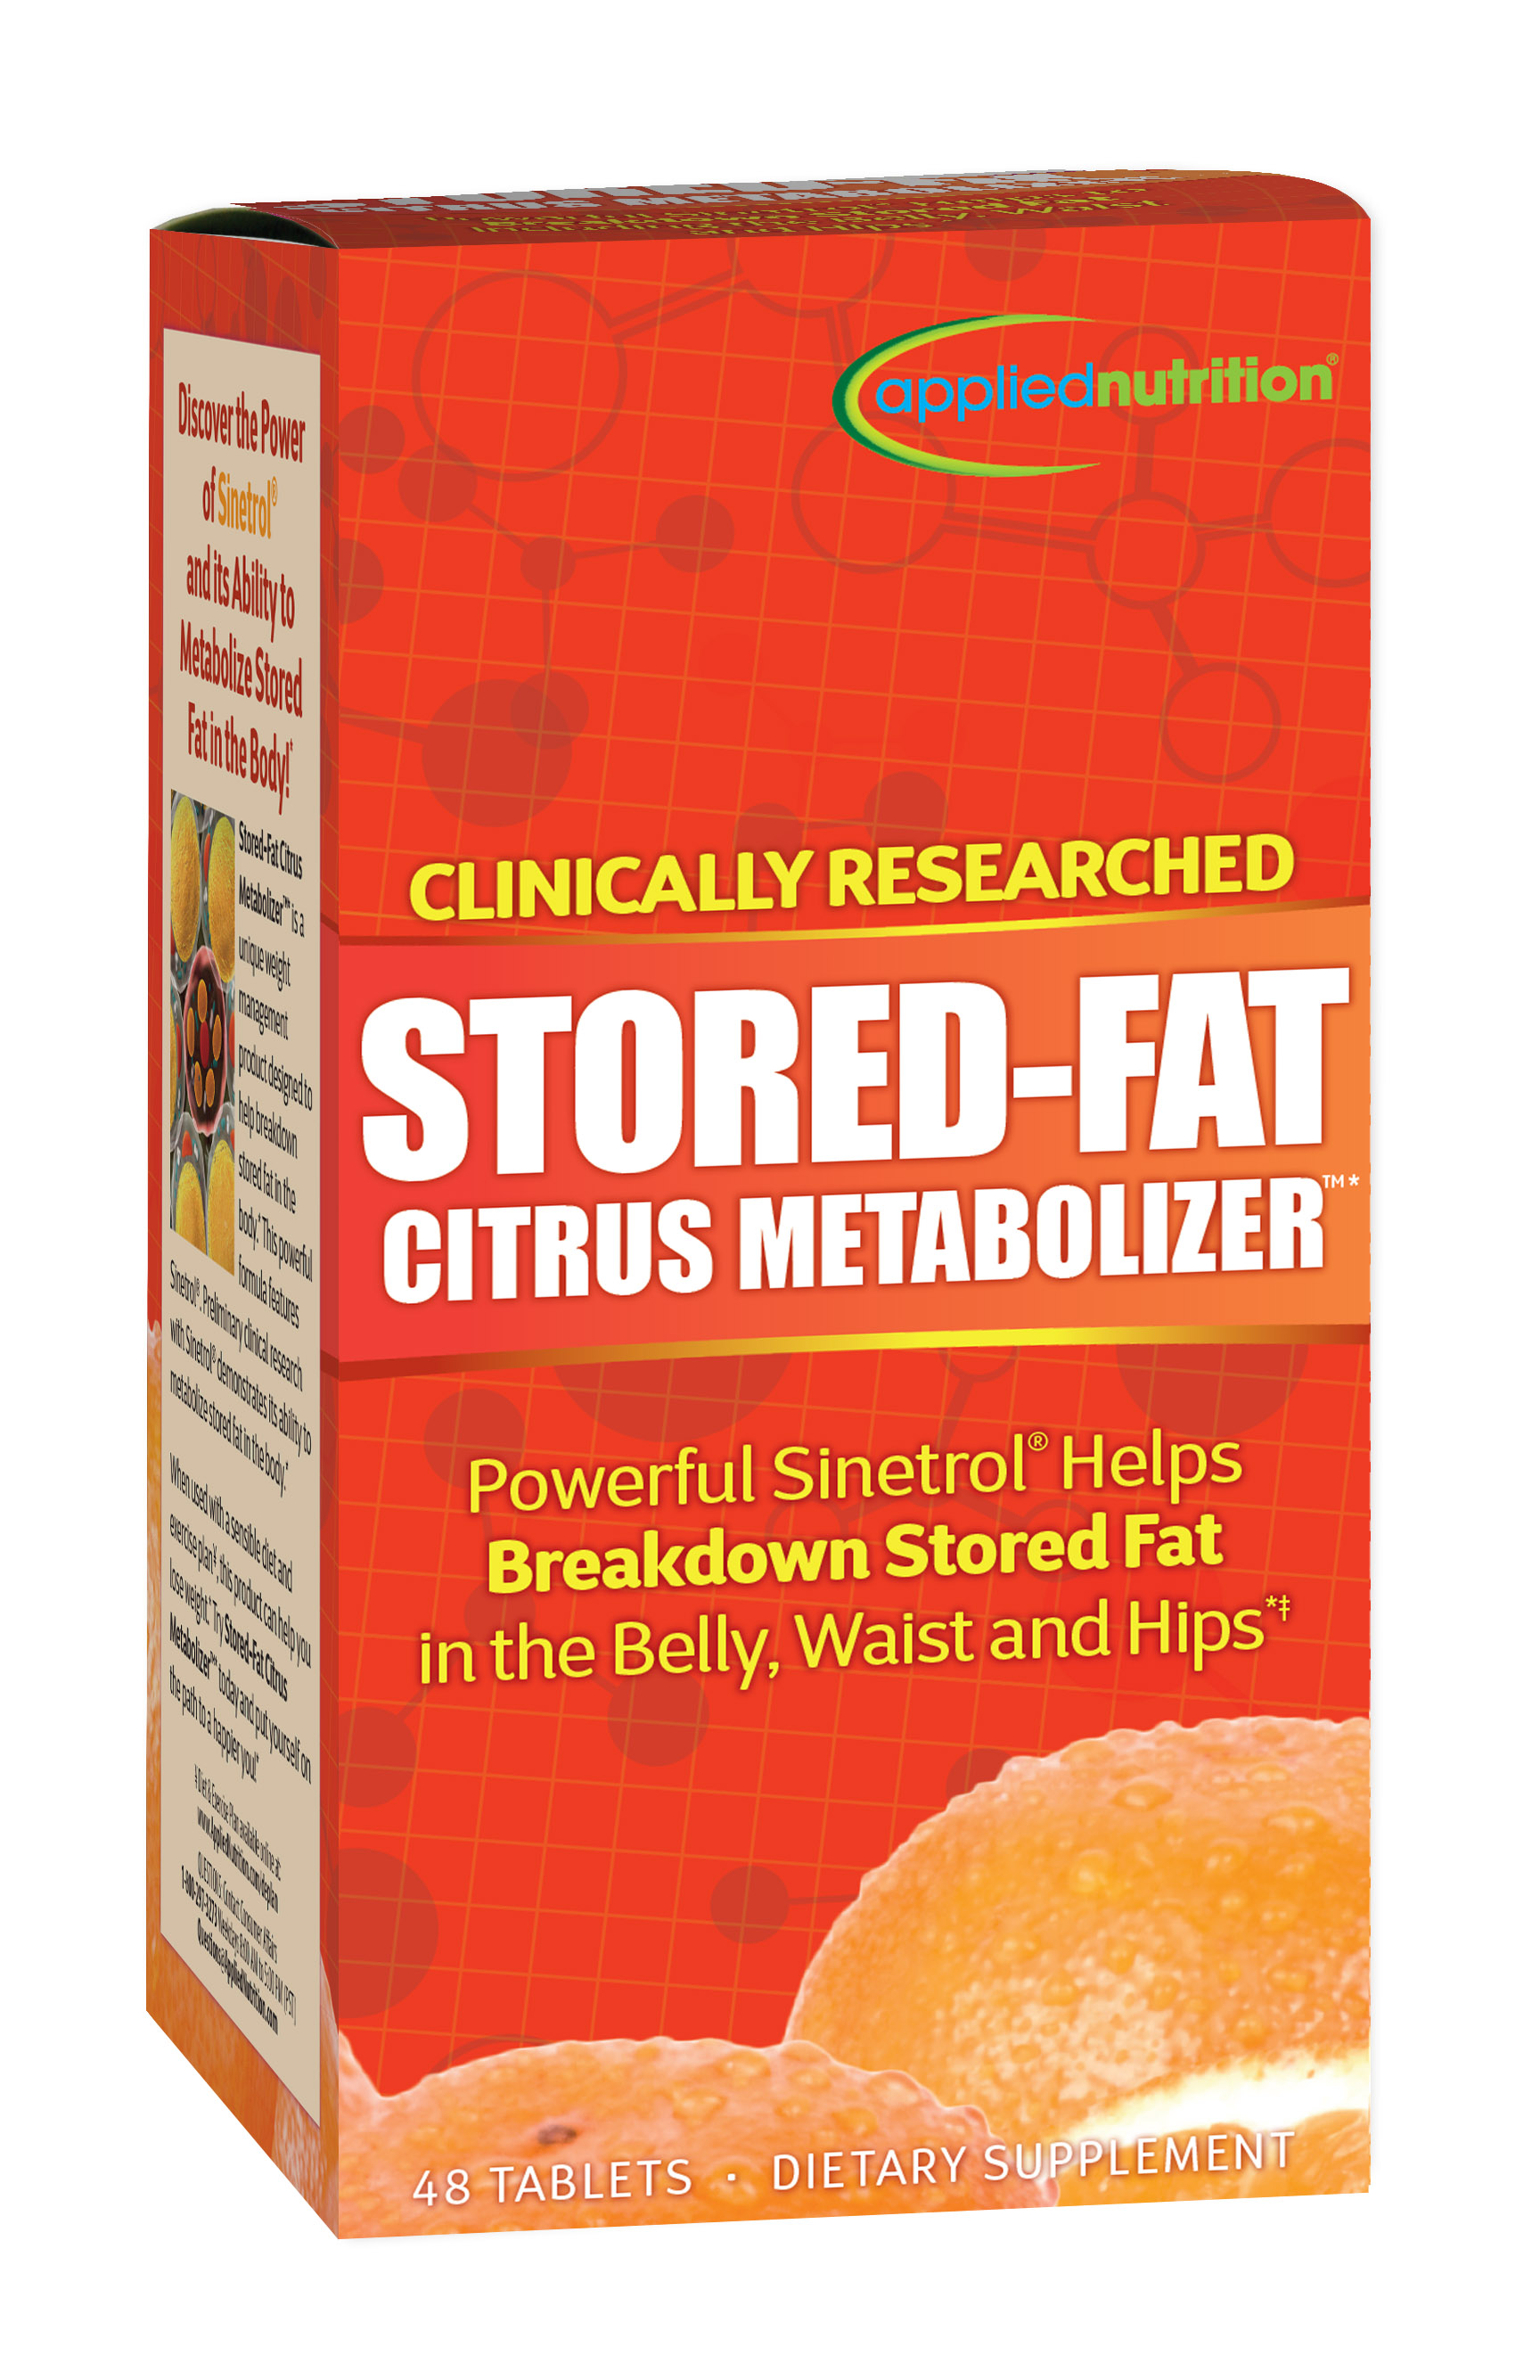 Stored-Fat Citrus Metabolizer by Irwin Naturals